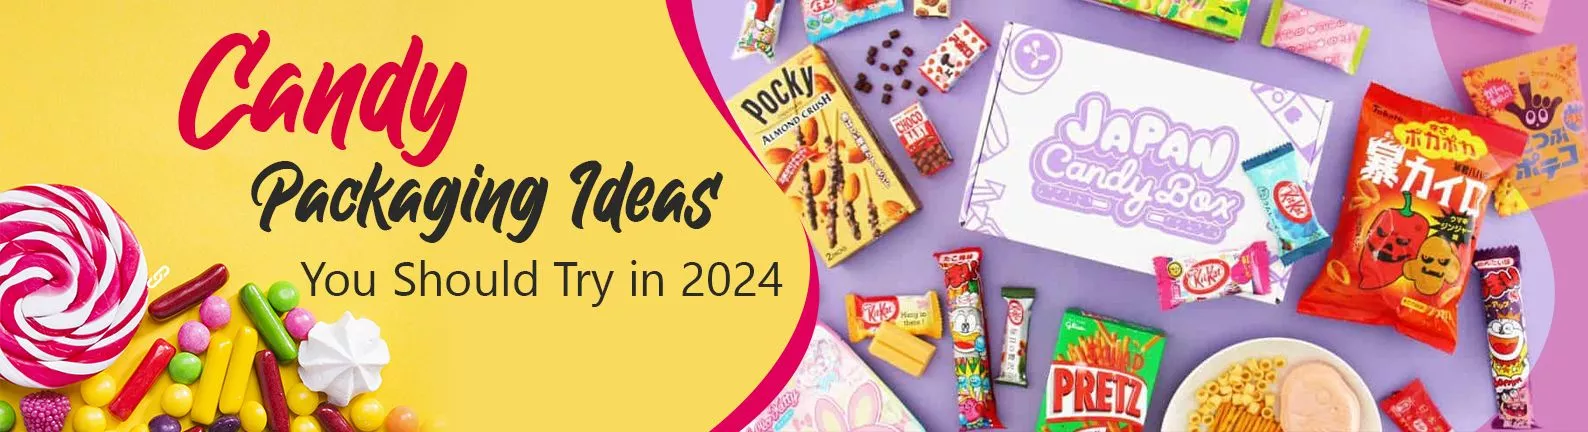 Candy-Packaging-Ideas-You-Should-Try-in-2023